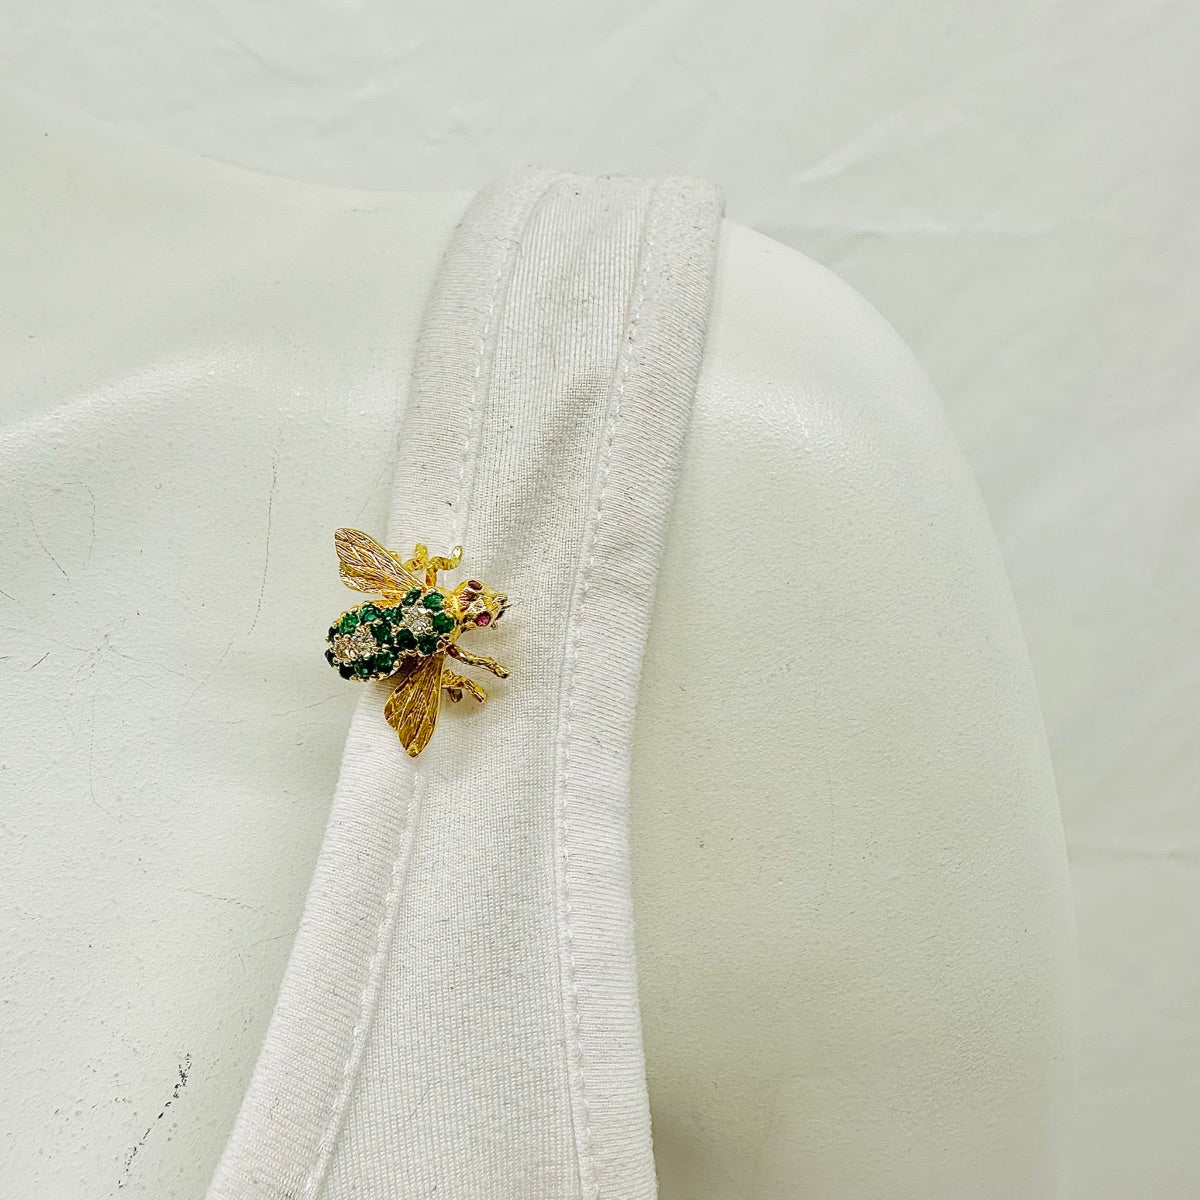 Rosenthal 18K Gold "Bee" Pin with Diamonds, Rubys and Emeralds